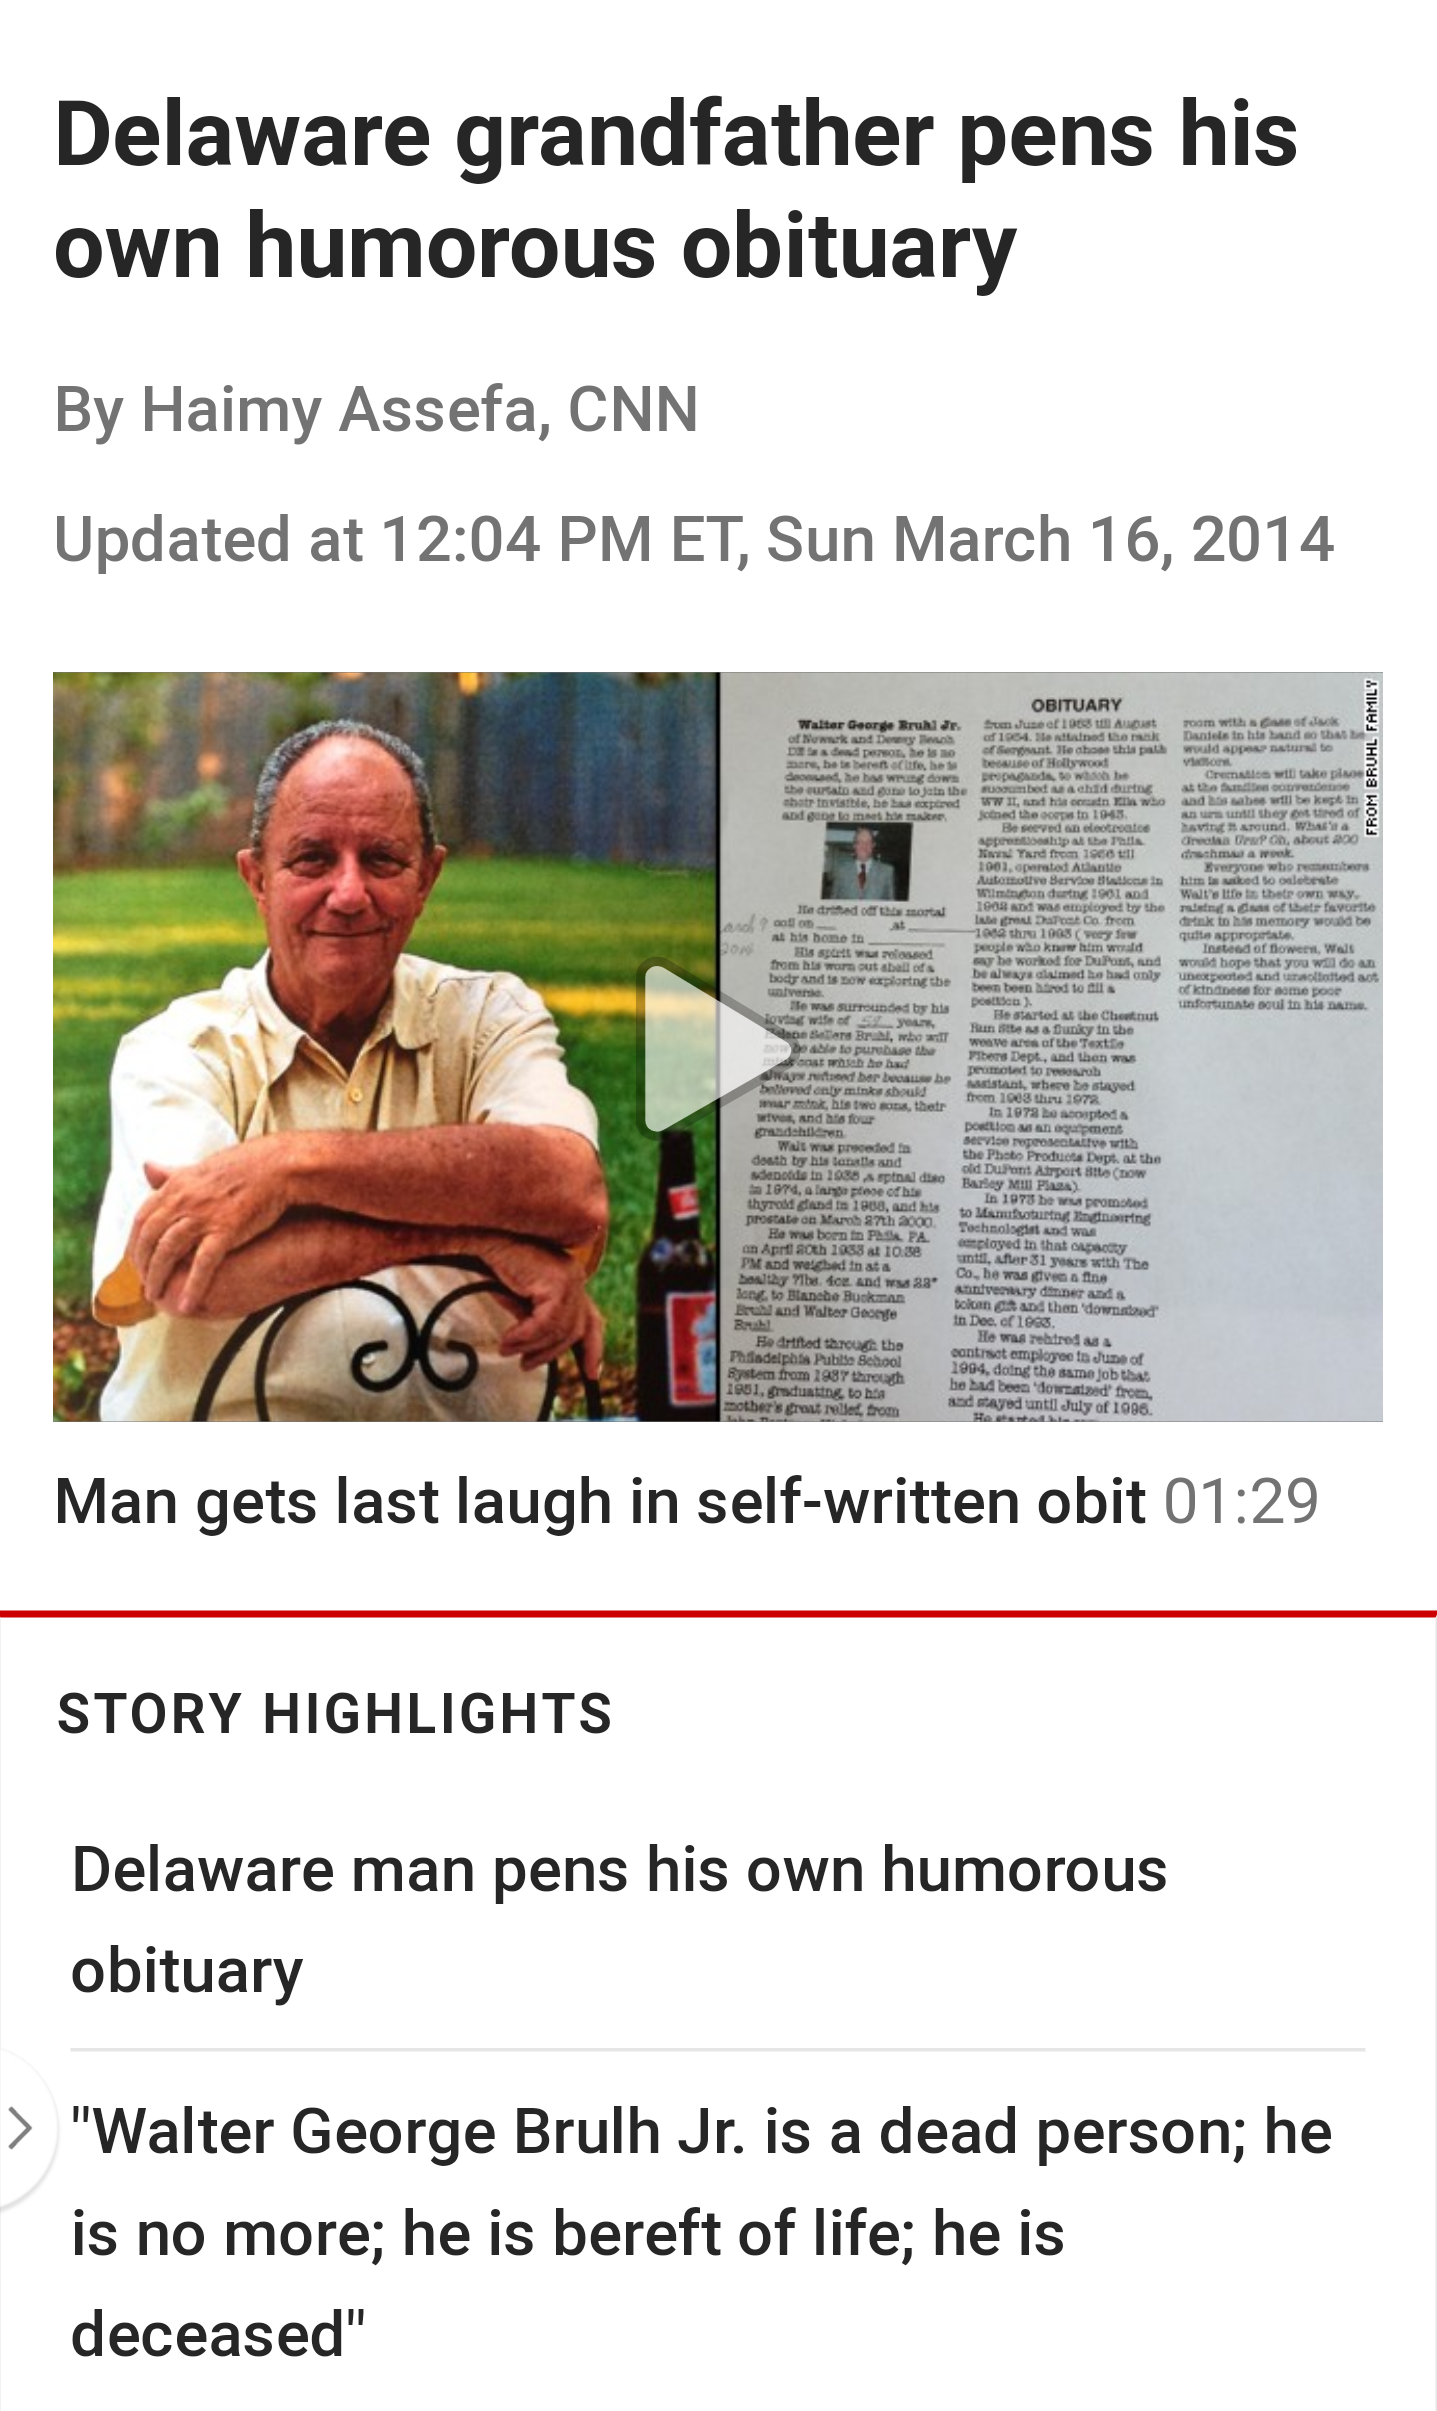 media - Delaware grandfather pens his own humorous obituary By Haimy Assefa, Cnn Updated at Et, Sun Man gets last laugh in selfwritten obit Story Highlights Delaware man pens his own humorous obituary > "Walter George Brulh Jr. is a dead person; he is no 